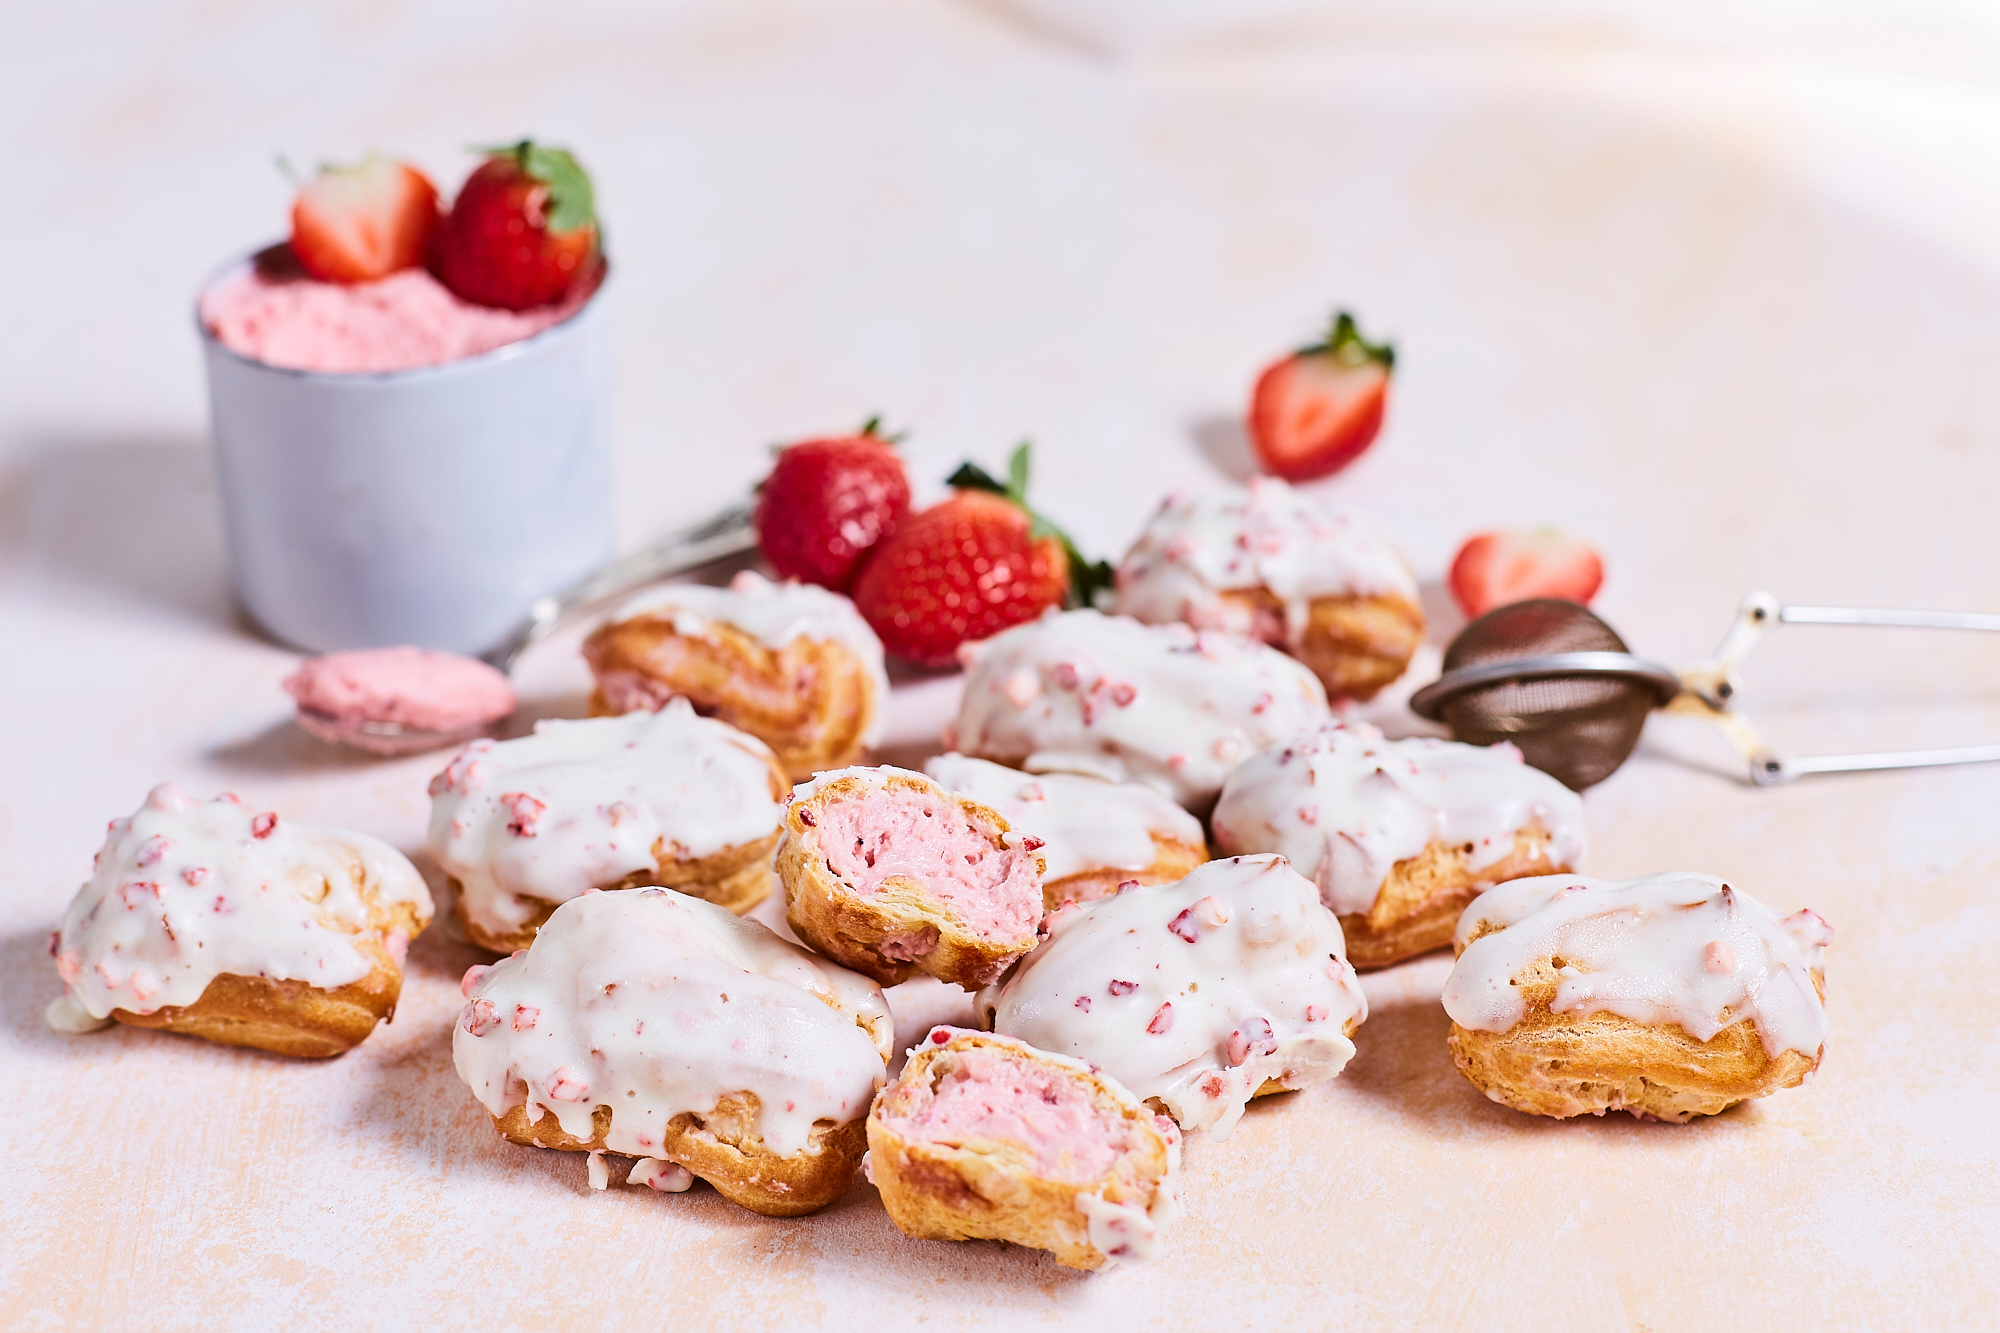 Small eclairs with strawberry filling